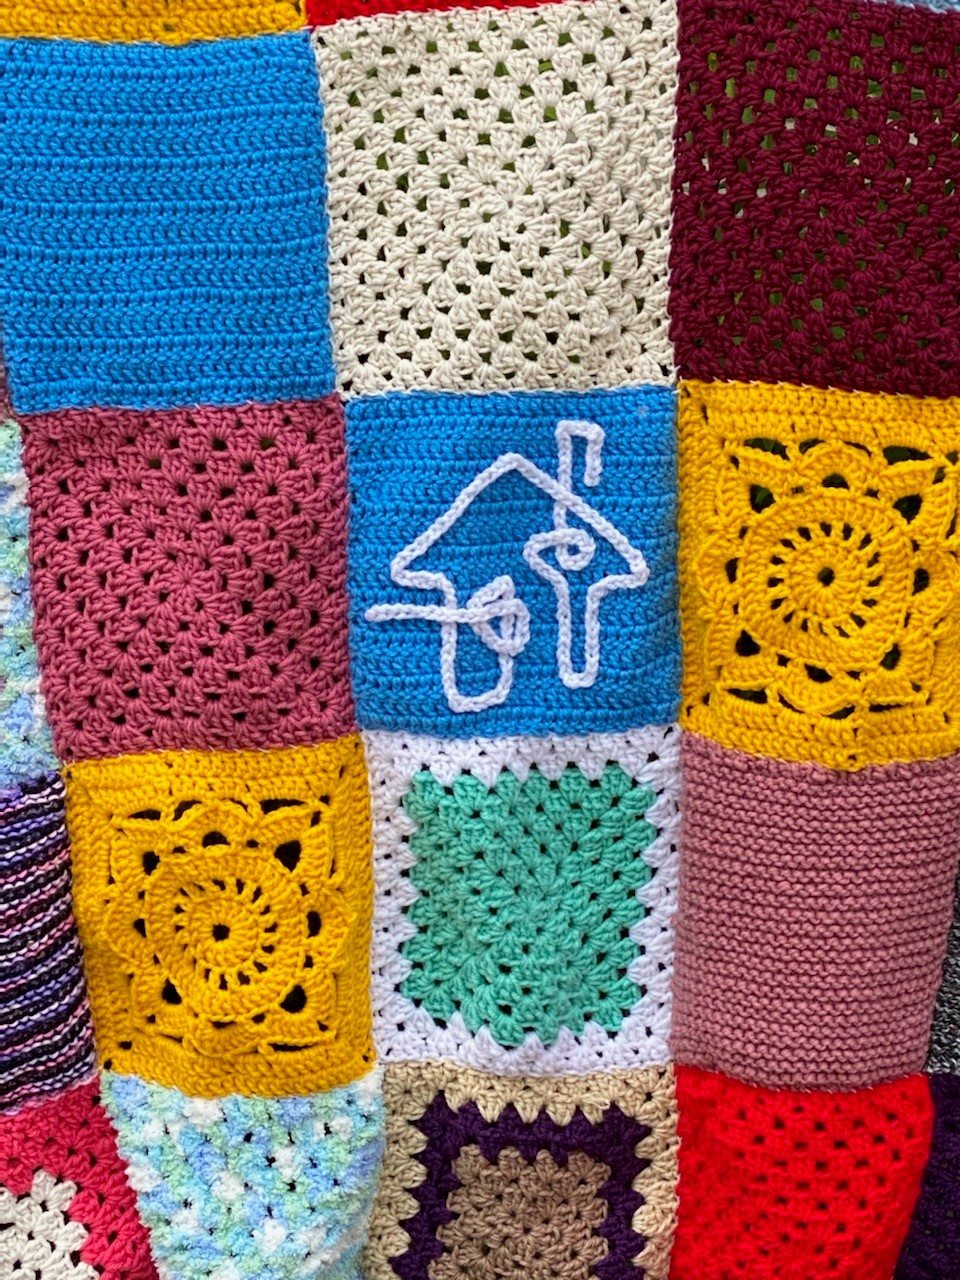 Colourful knit squares joined together to cover a community object.